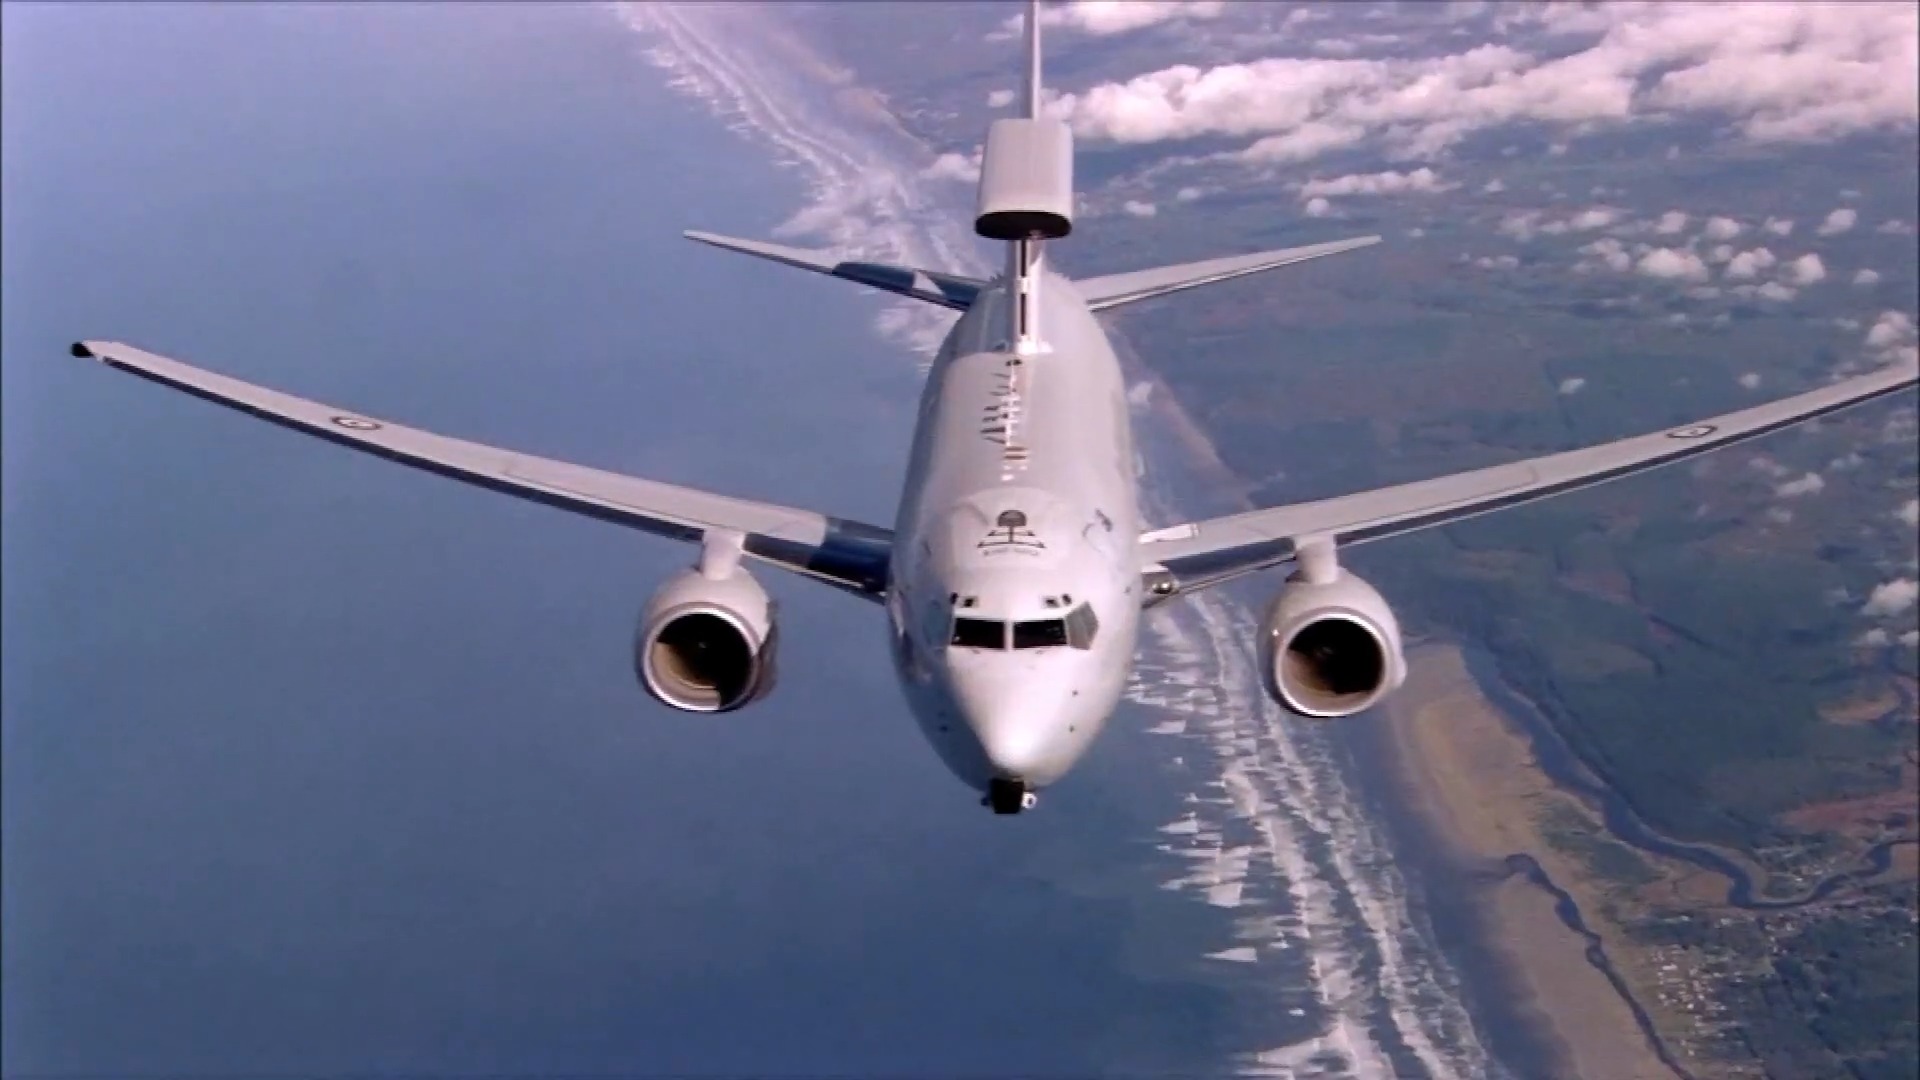 Royal Australian Air Force Boeing E-7A Wedgetail Airborne Early Warning & Control aircraft